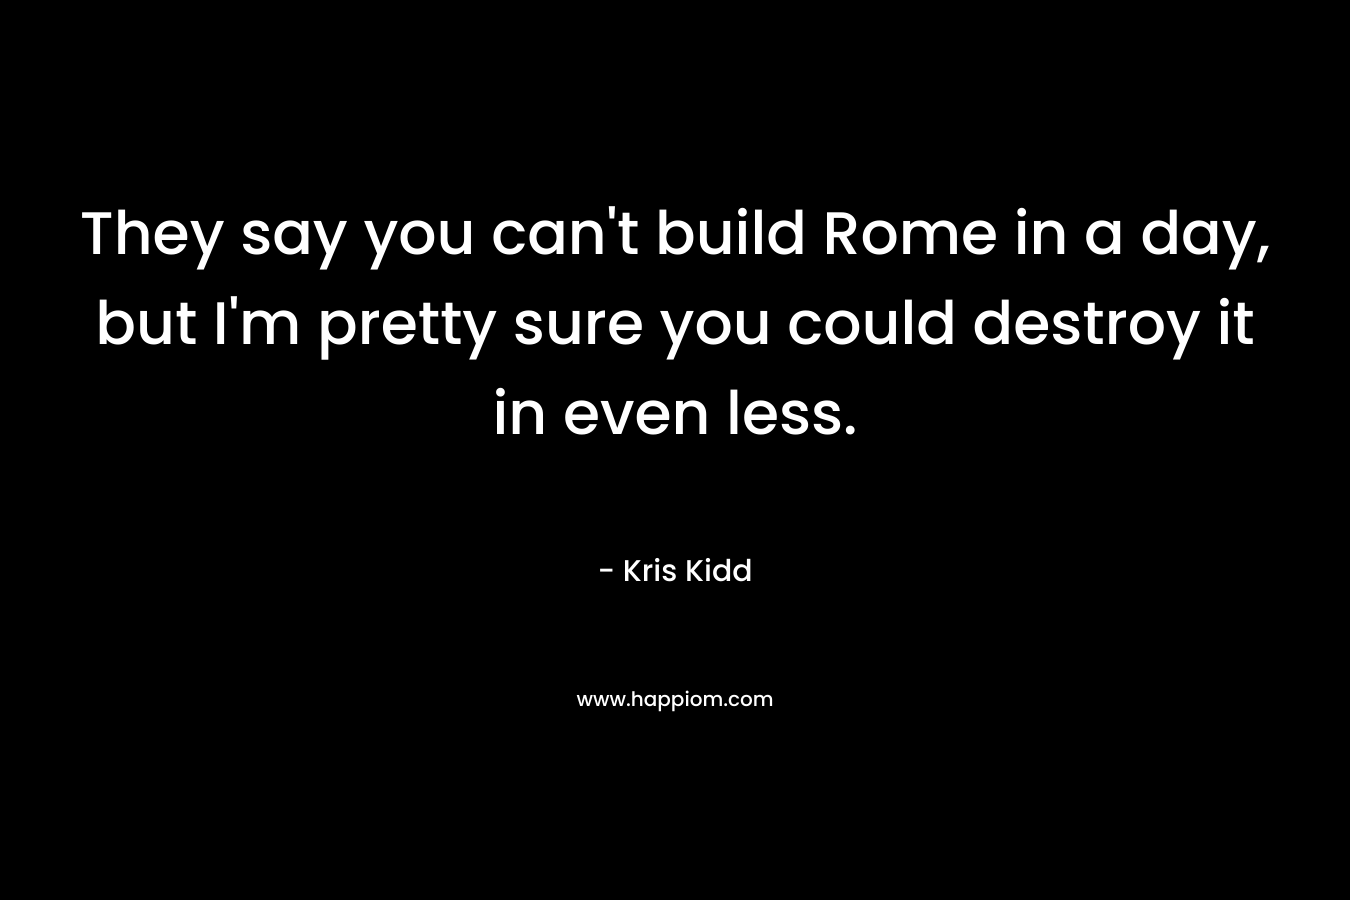 They say you can’t build Rome in a day, but I’m pretty sure you could destroy it in even less. – Kris Kidd